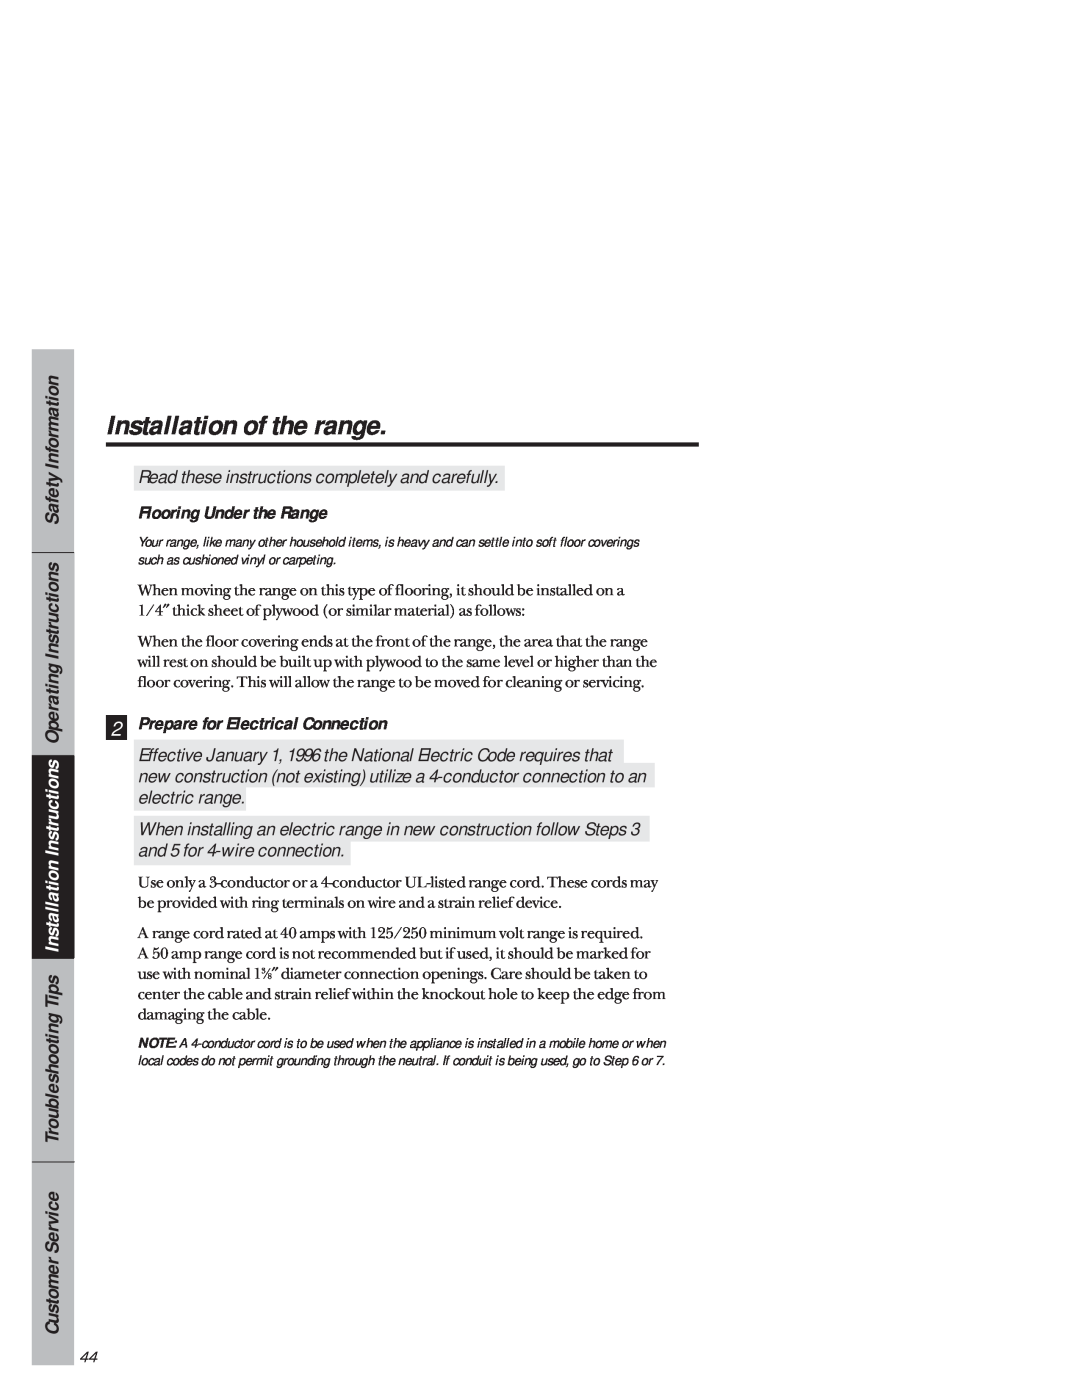 GE 49-8941, 164D3333P171 owner manual Flooring Under the Range, Prepare for Electrical Connection, Installation of the range 